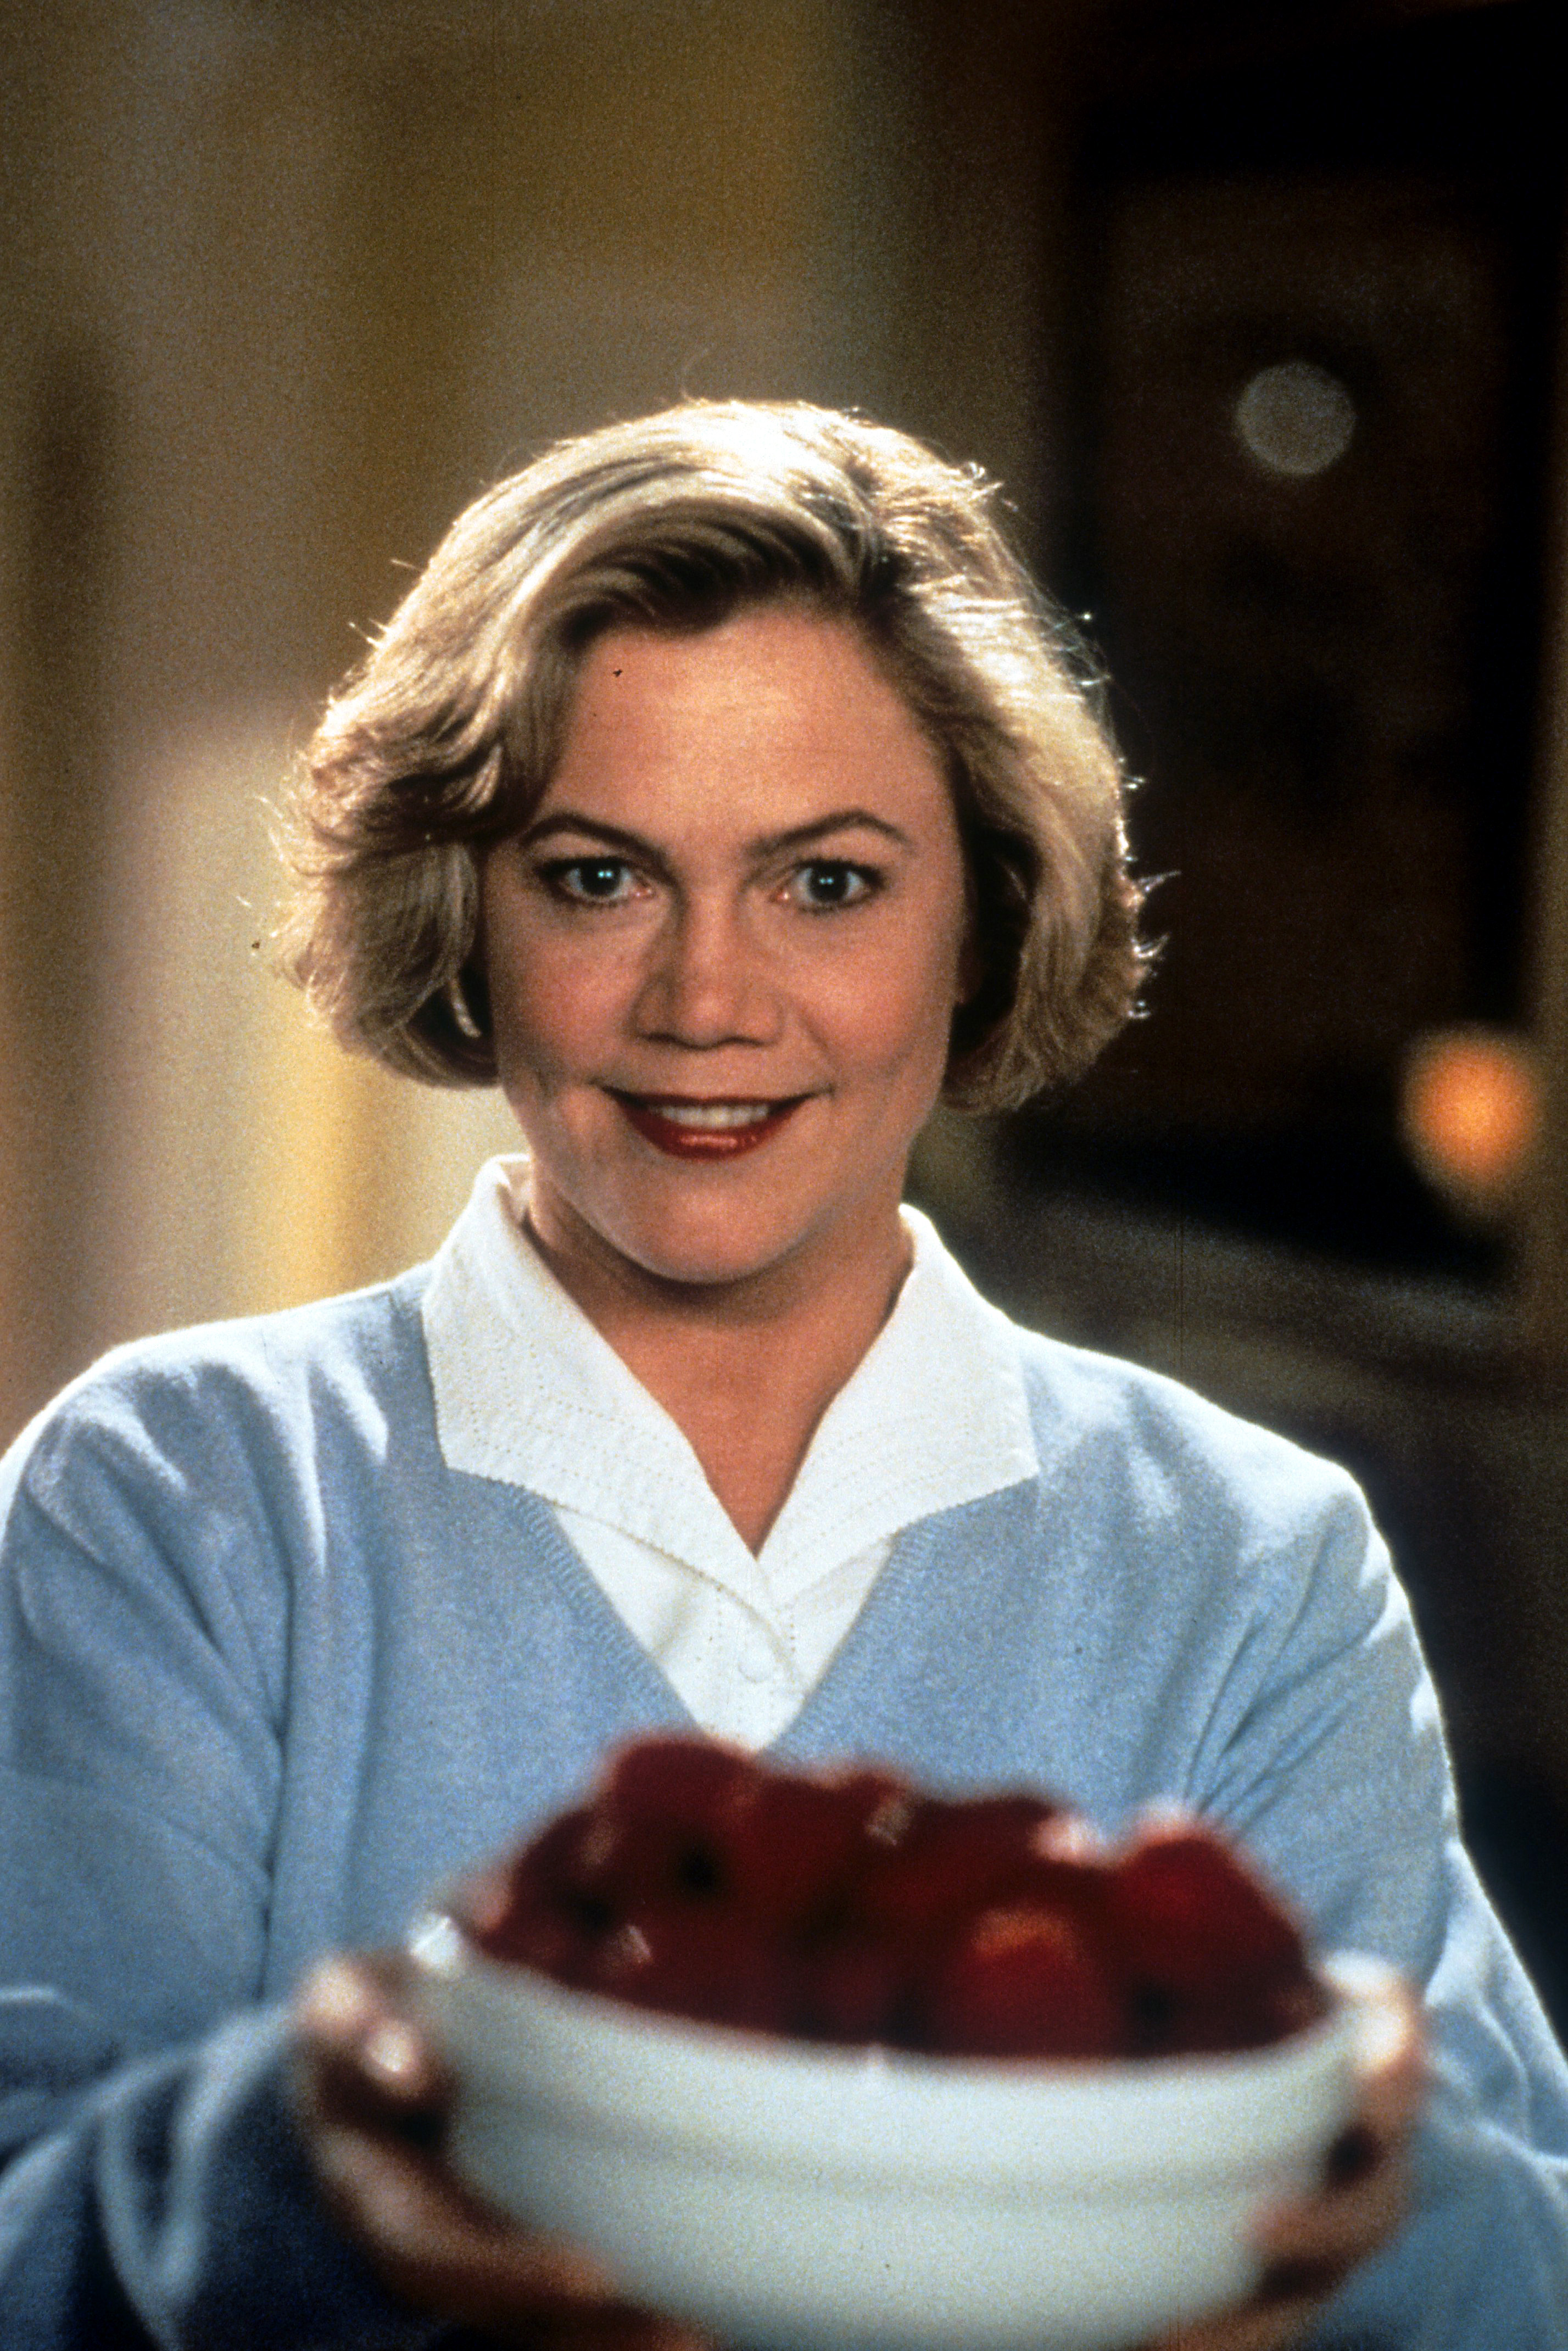 Kathleen Turner holding a bowl of fruit in a scene from the film "Serial Mom" released 1994. | Source: Getty Images